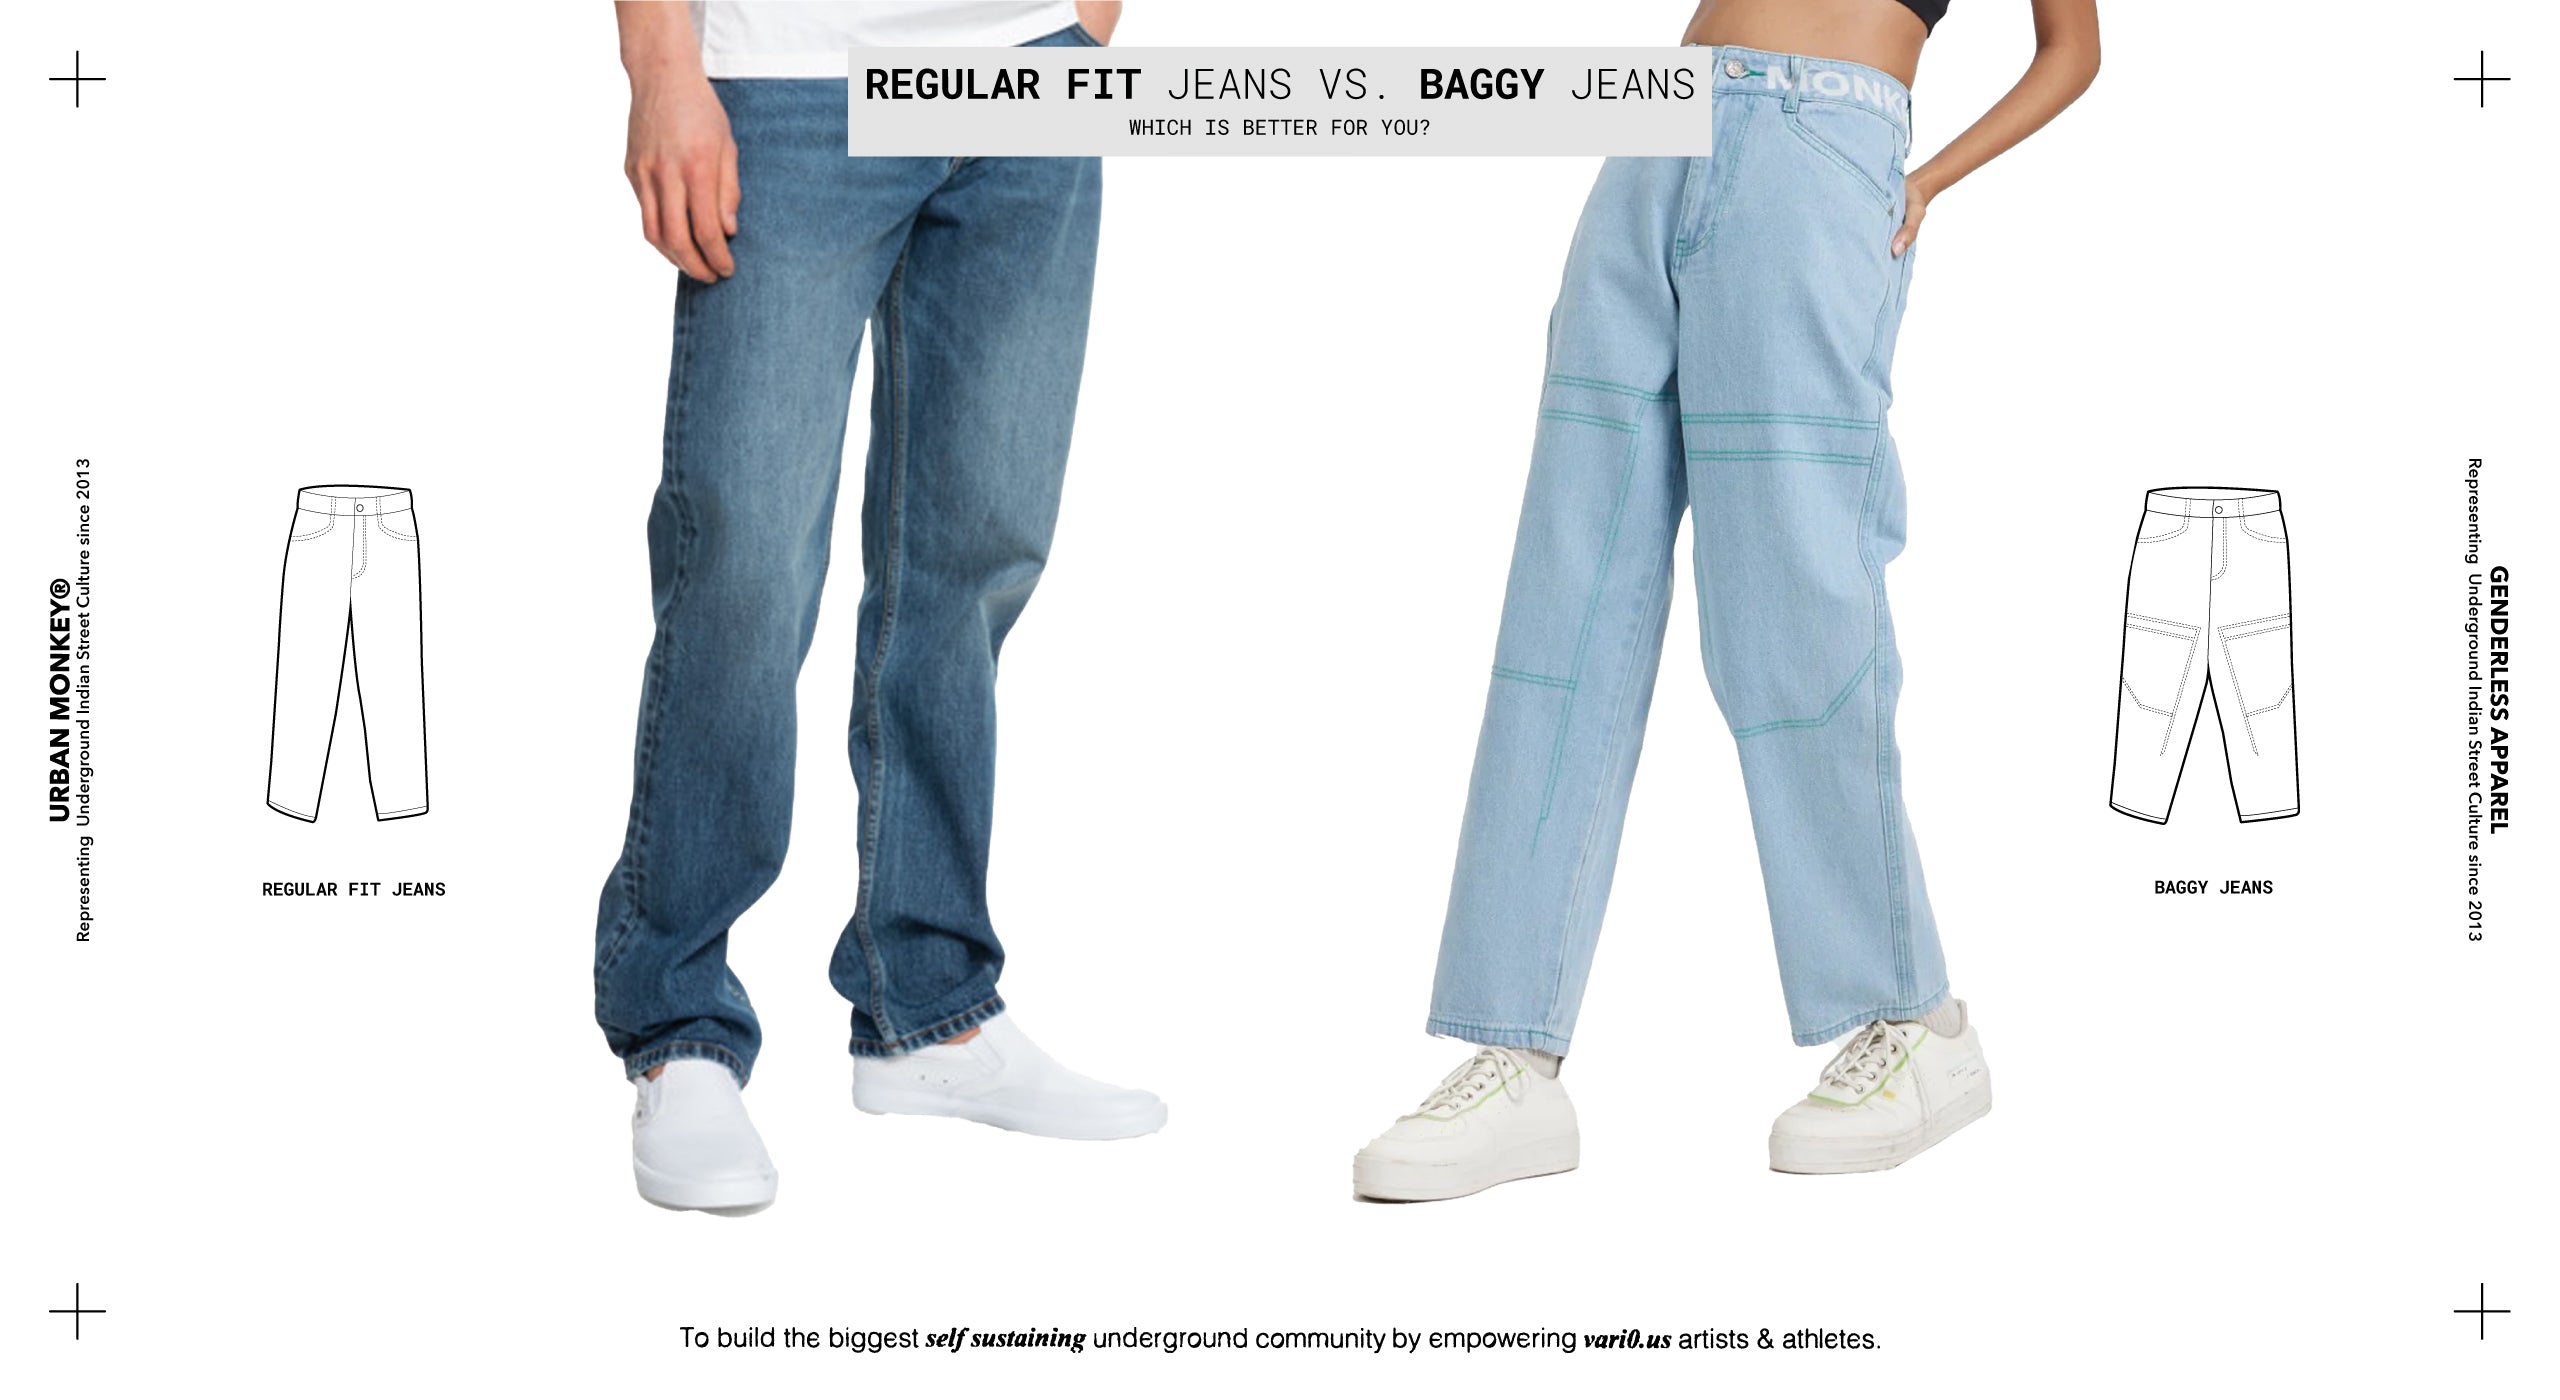 BEST FITTING JEANS TYPE FOR MEN & How They Should Fit (Skinny